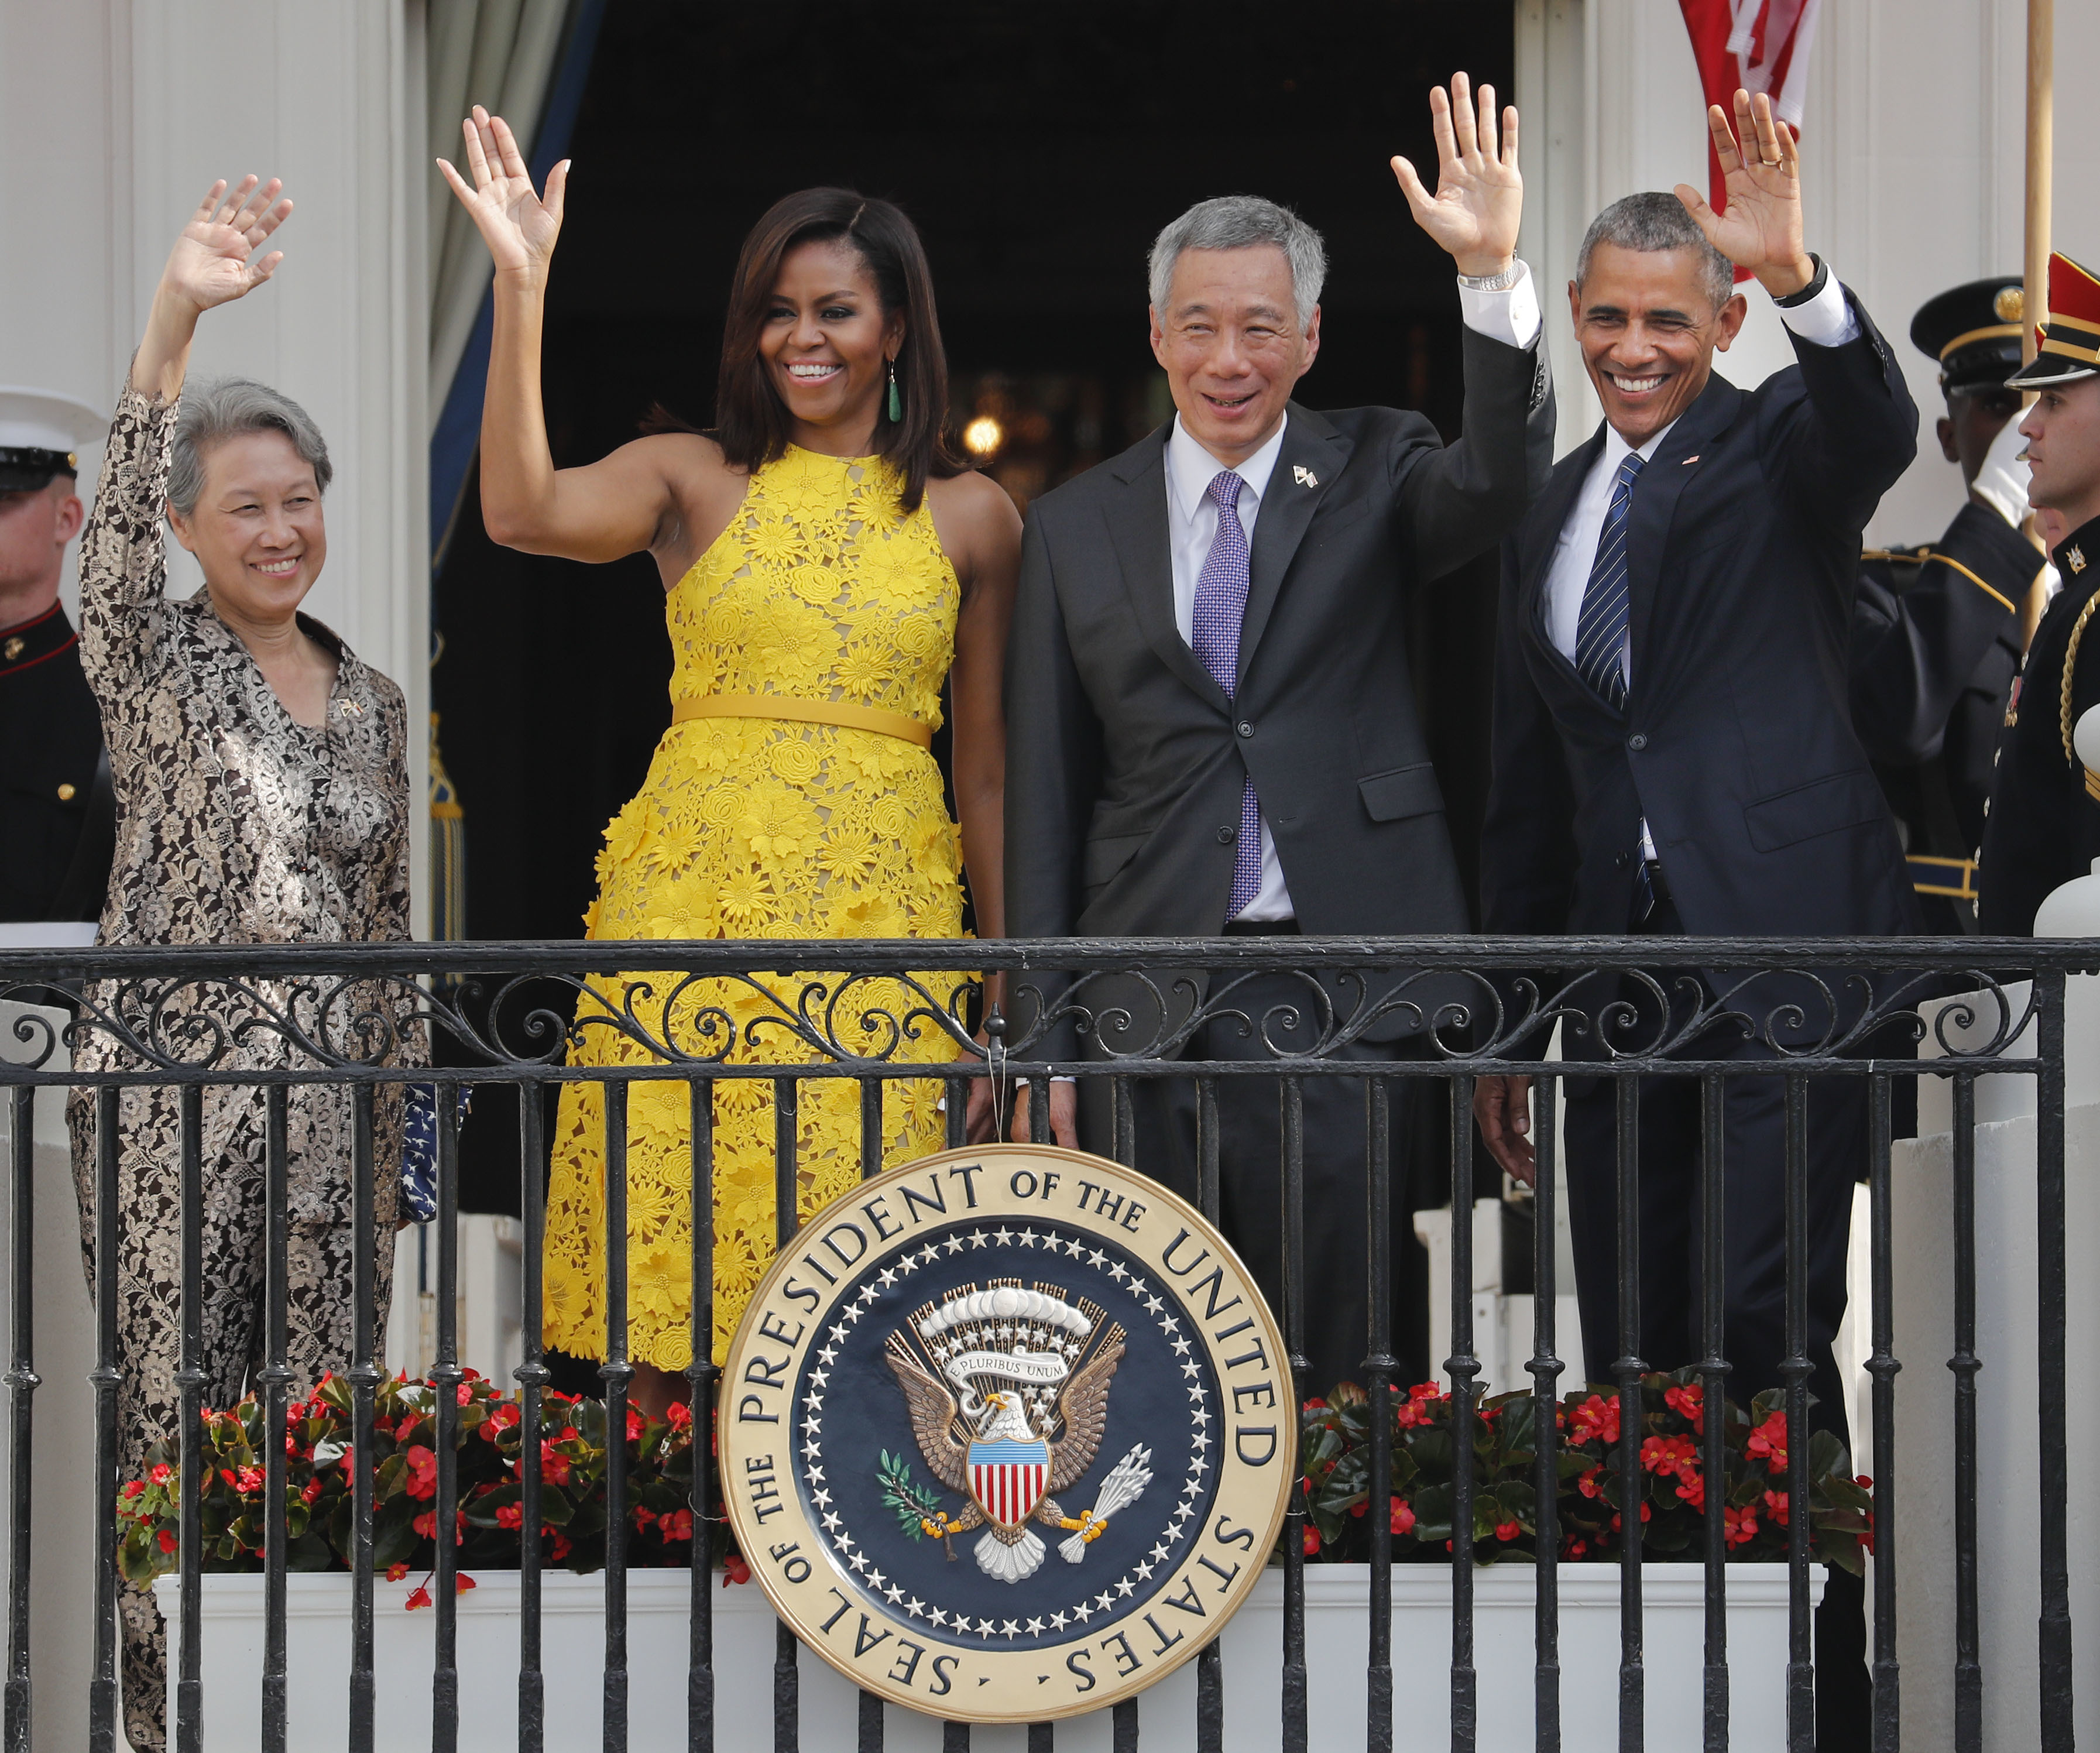 President Barack Obama, first lady Michelle Obama, Singapore's Prime Minister Lee Hsien Loong and his wife Ho Ching, wave from the Truman Balcony of the White House in Washington, during a state arrival ceremony, Tuesday, Aug. 2, 2016. (AP Photo/Pablo Martinez Monsivais)